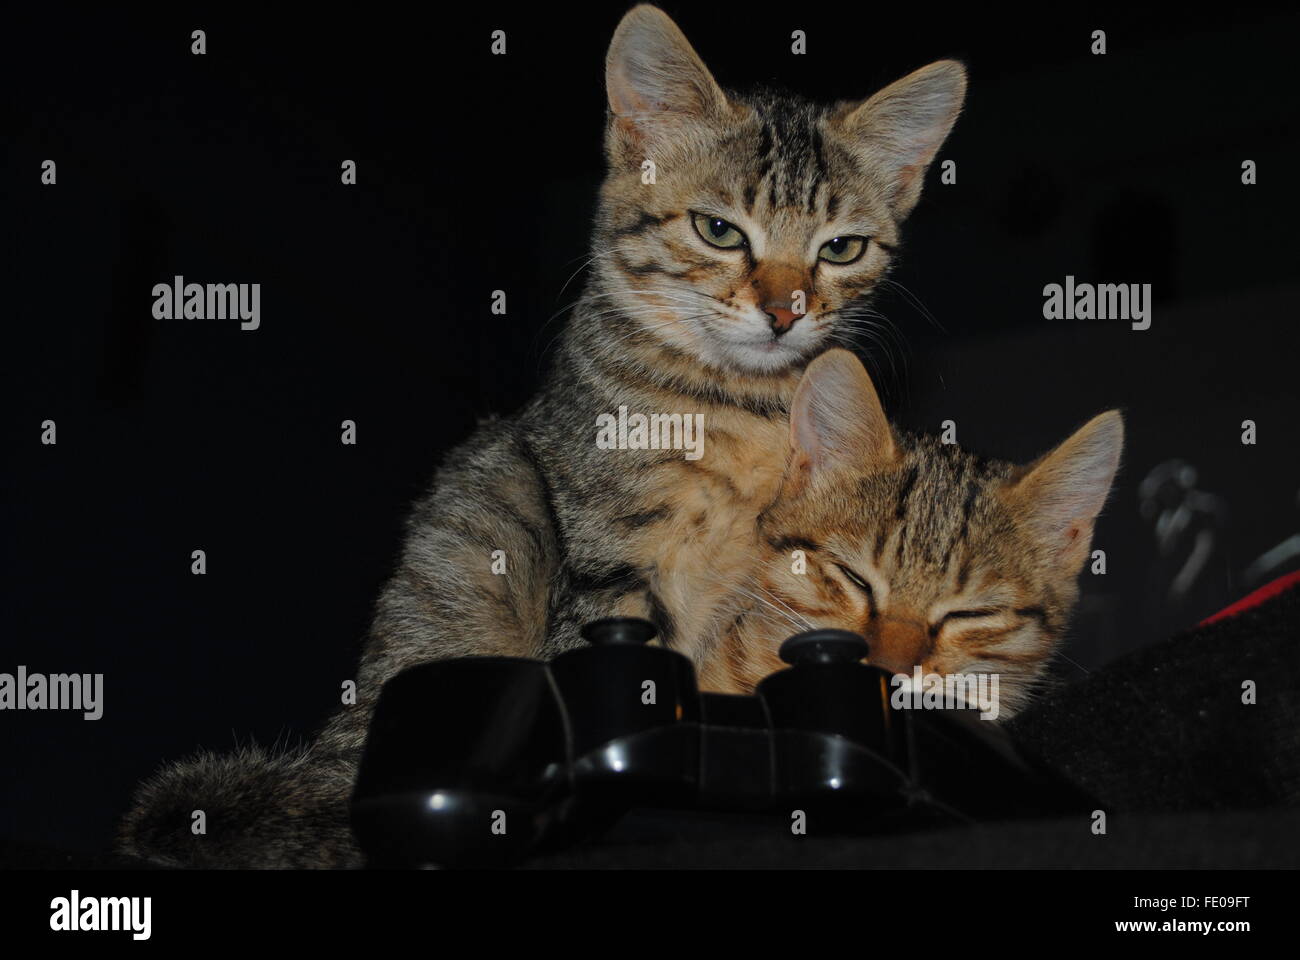 Two kittens sitting with a play station game pad Stock Photo